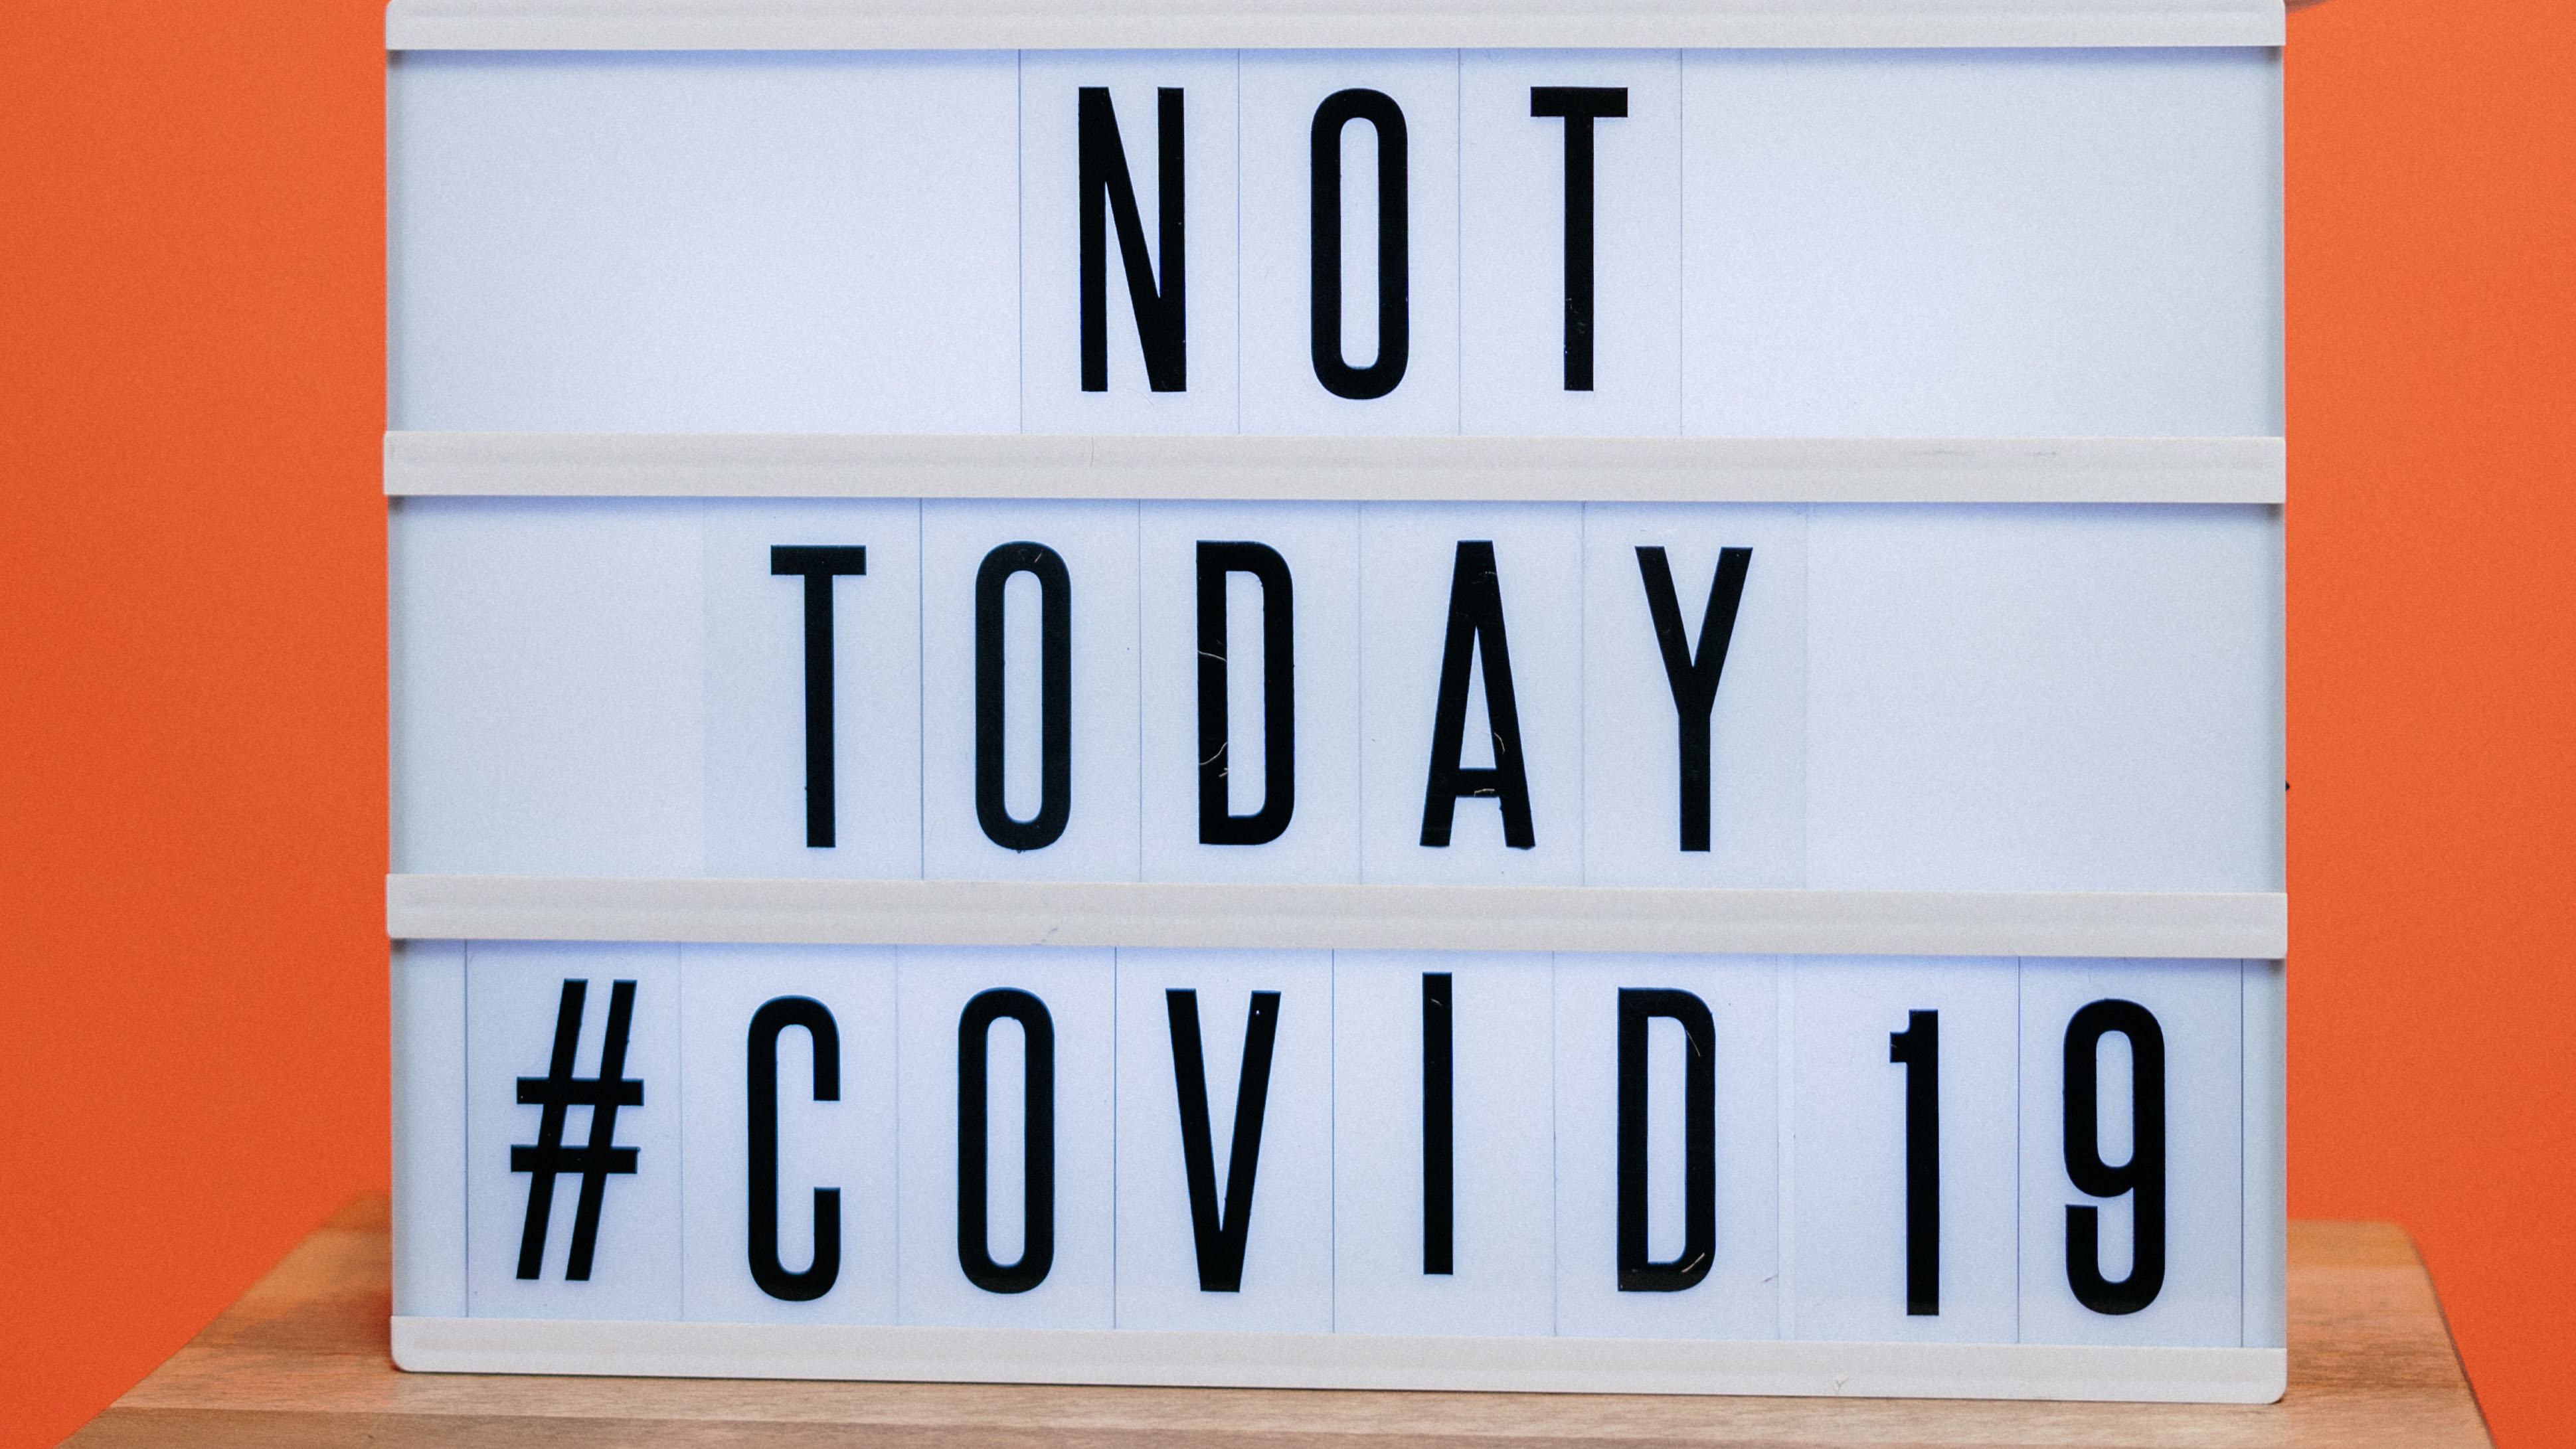 Sign reads "Not today #COVID19"